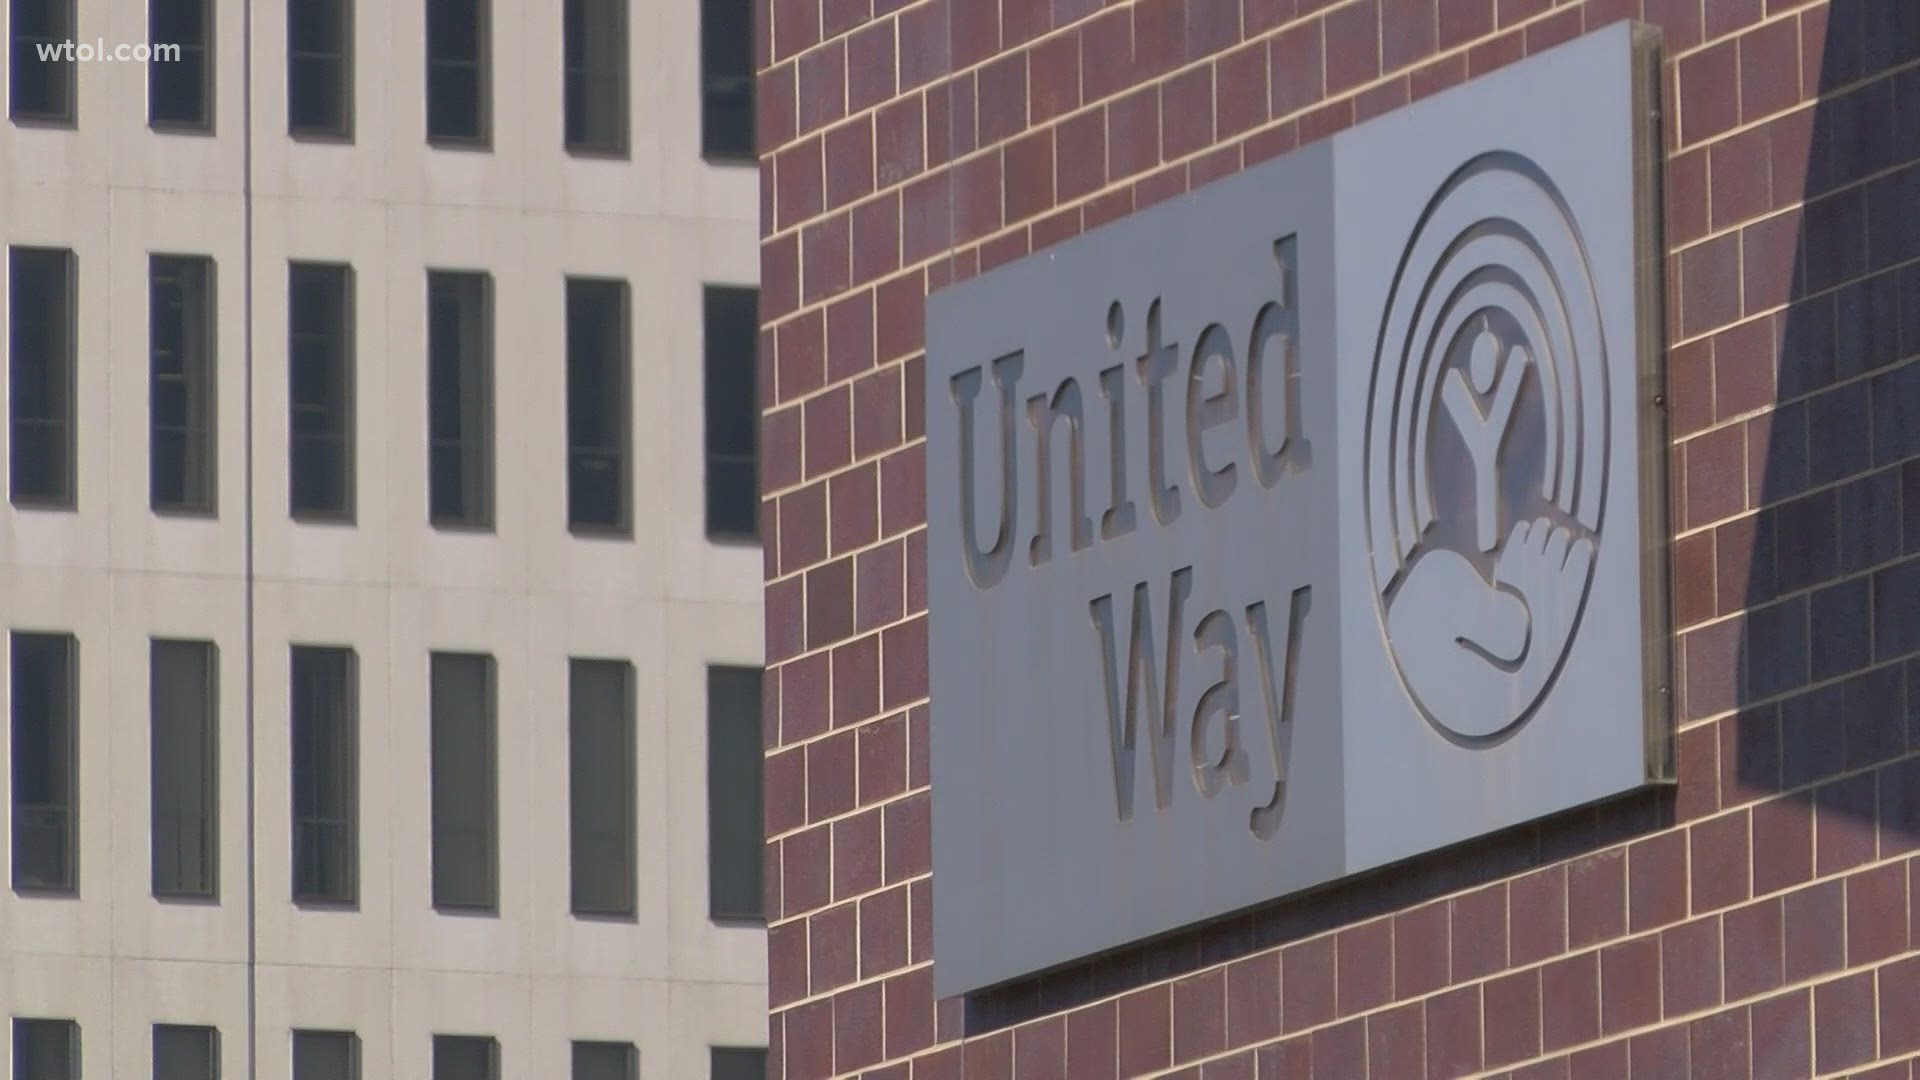 In February 2020, before the pandemic began, United Way handled just under 6,000 cases. This February, they handled nearly 13,000.